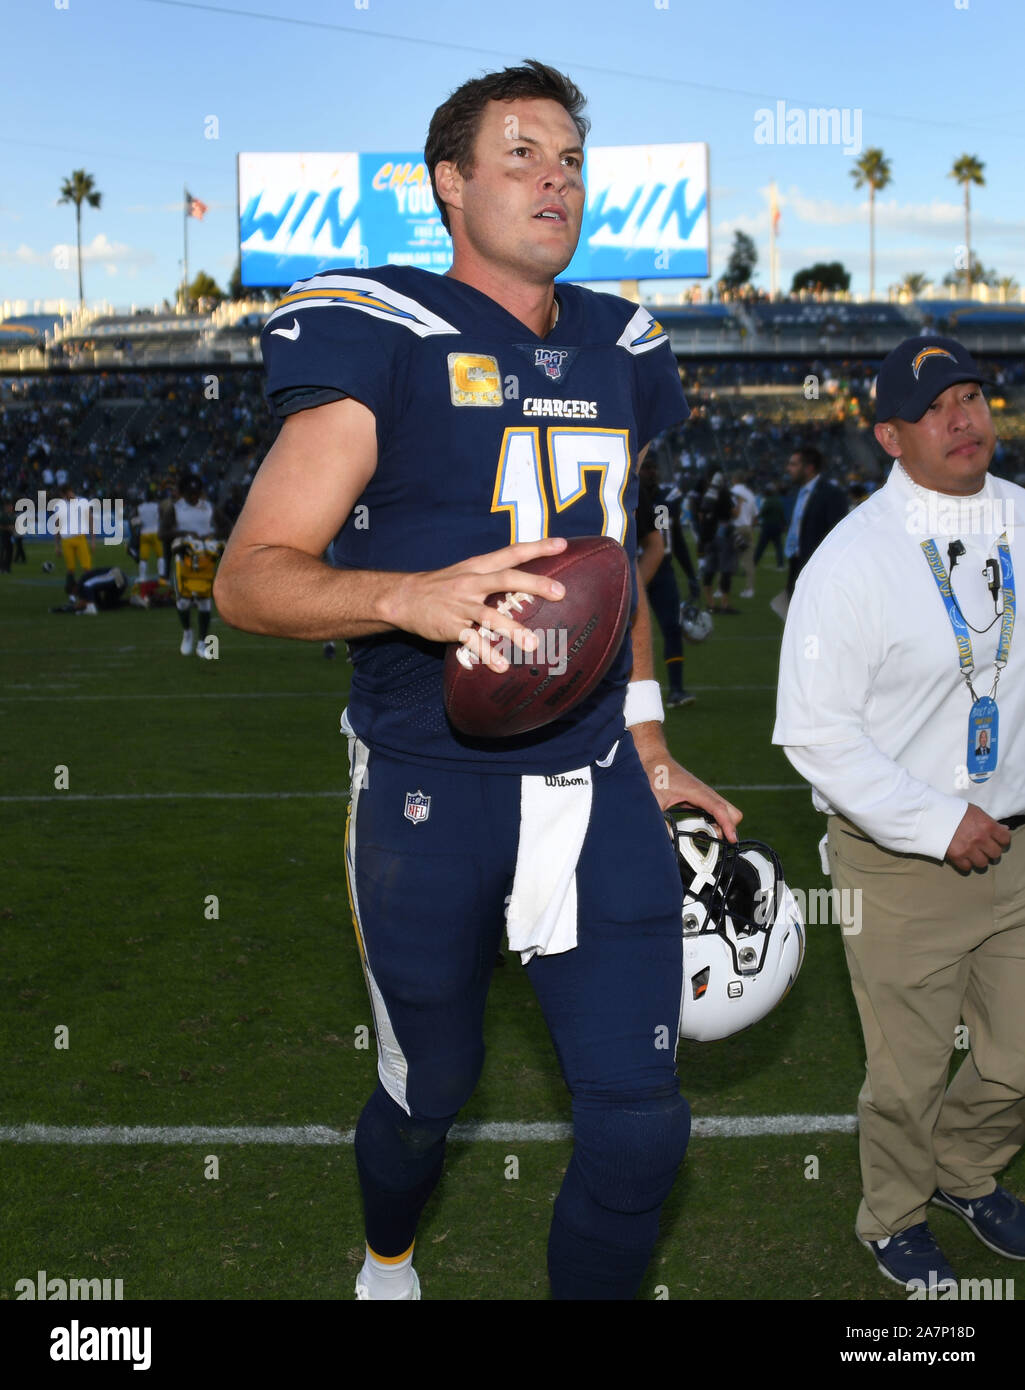 Carson, United States. 03rd Nov, 2019. Los Angeles Chargers' quarterback Philip Rivers come off the field postgame after victory over the Green Bay Packers at Dignity Health Sports Park in Carson, California on November 3, 2019. The Chargers beat the Packers 26-11.Photo by Jon SooHoo/UPI Credit: UPI/Alamy Live News Stock Photo